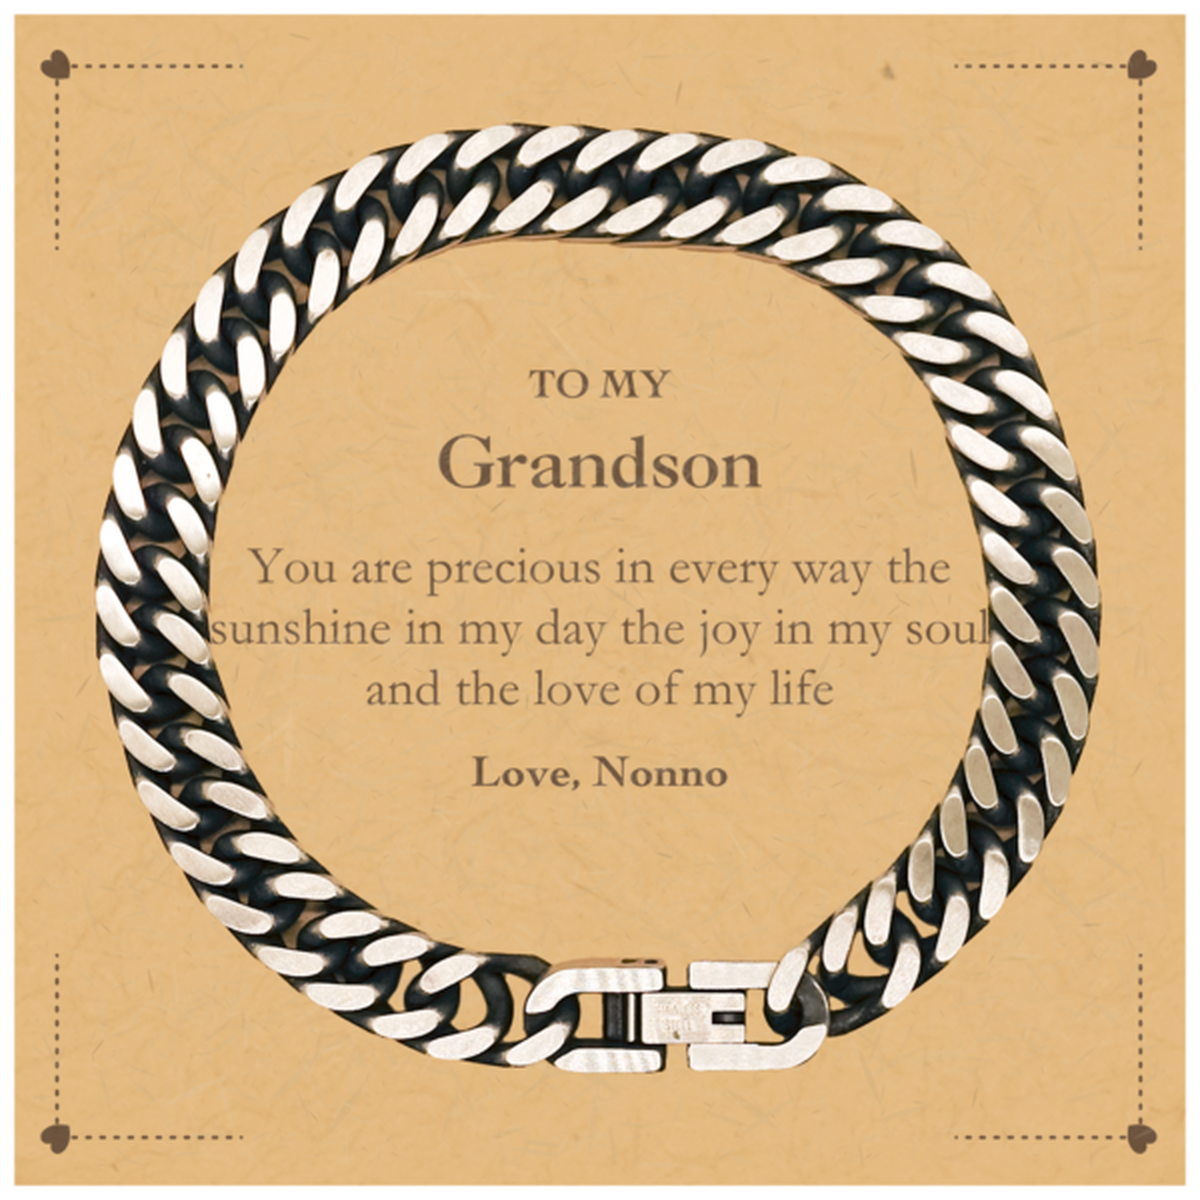 Graduation Gifts for Grandson Cuban Link Chain Bracelet Present from Nonno, Christmas Grandson Birthday Gifts Grandson You are precious in every way the sunshine in my day. Love, Nonno